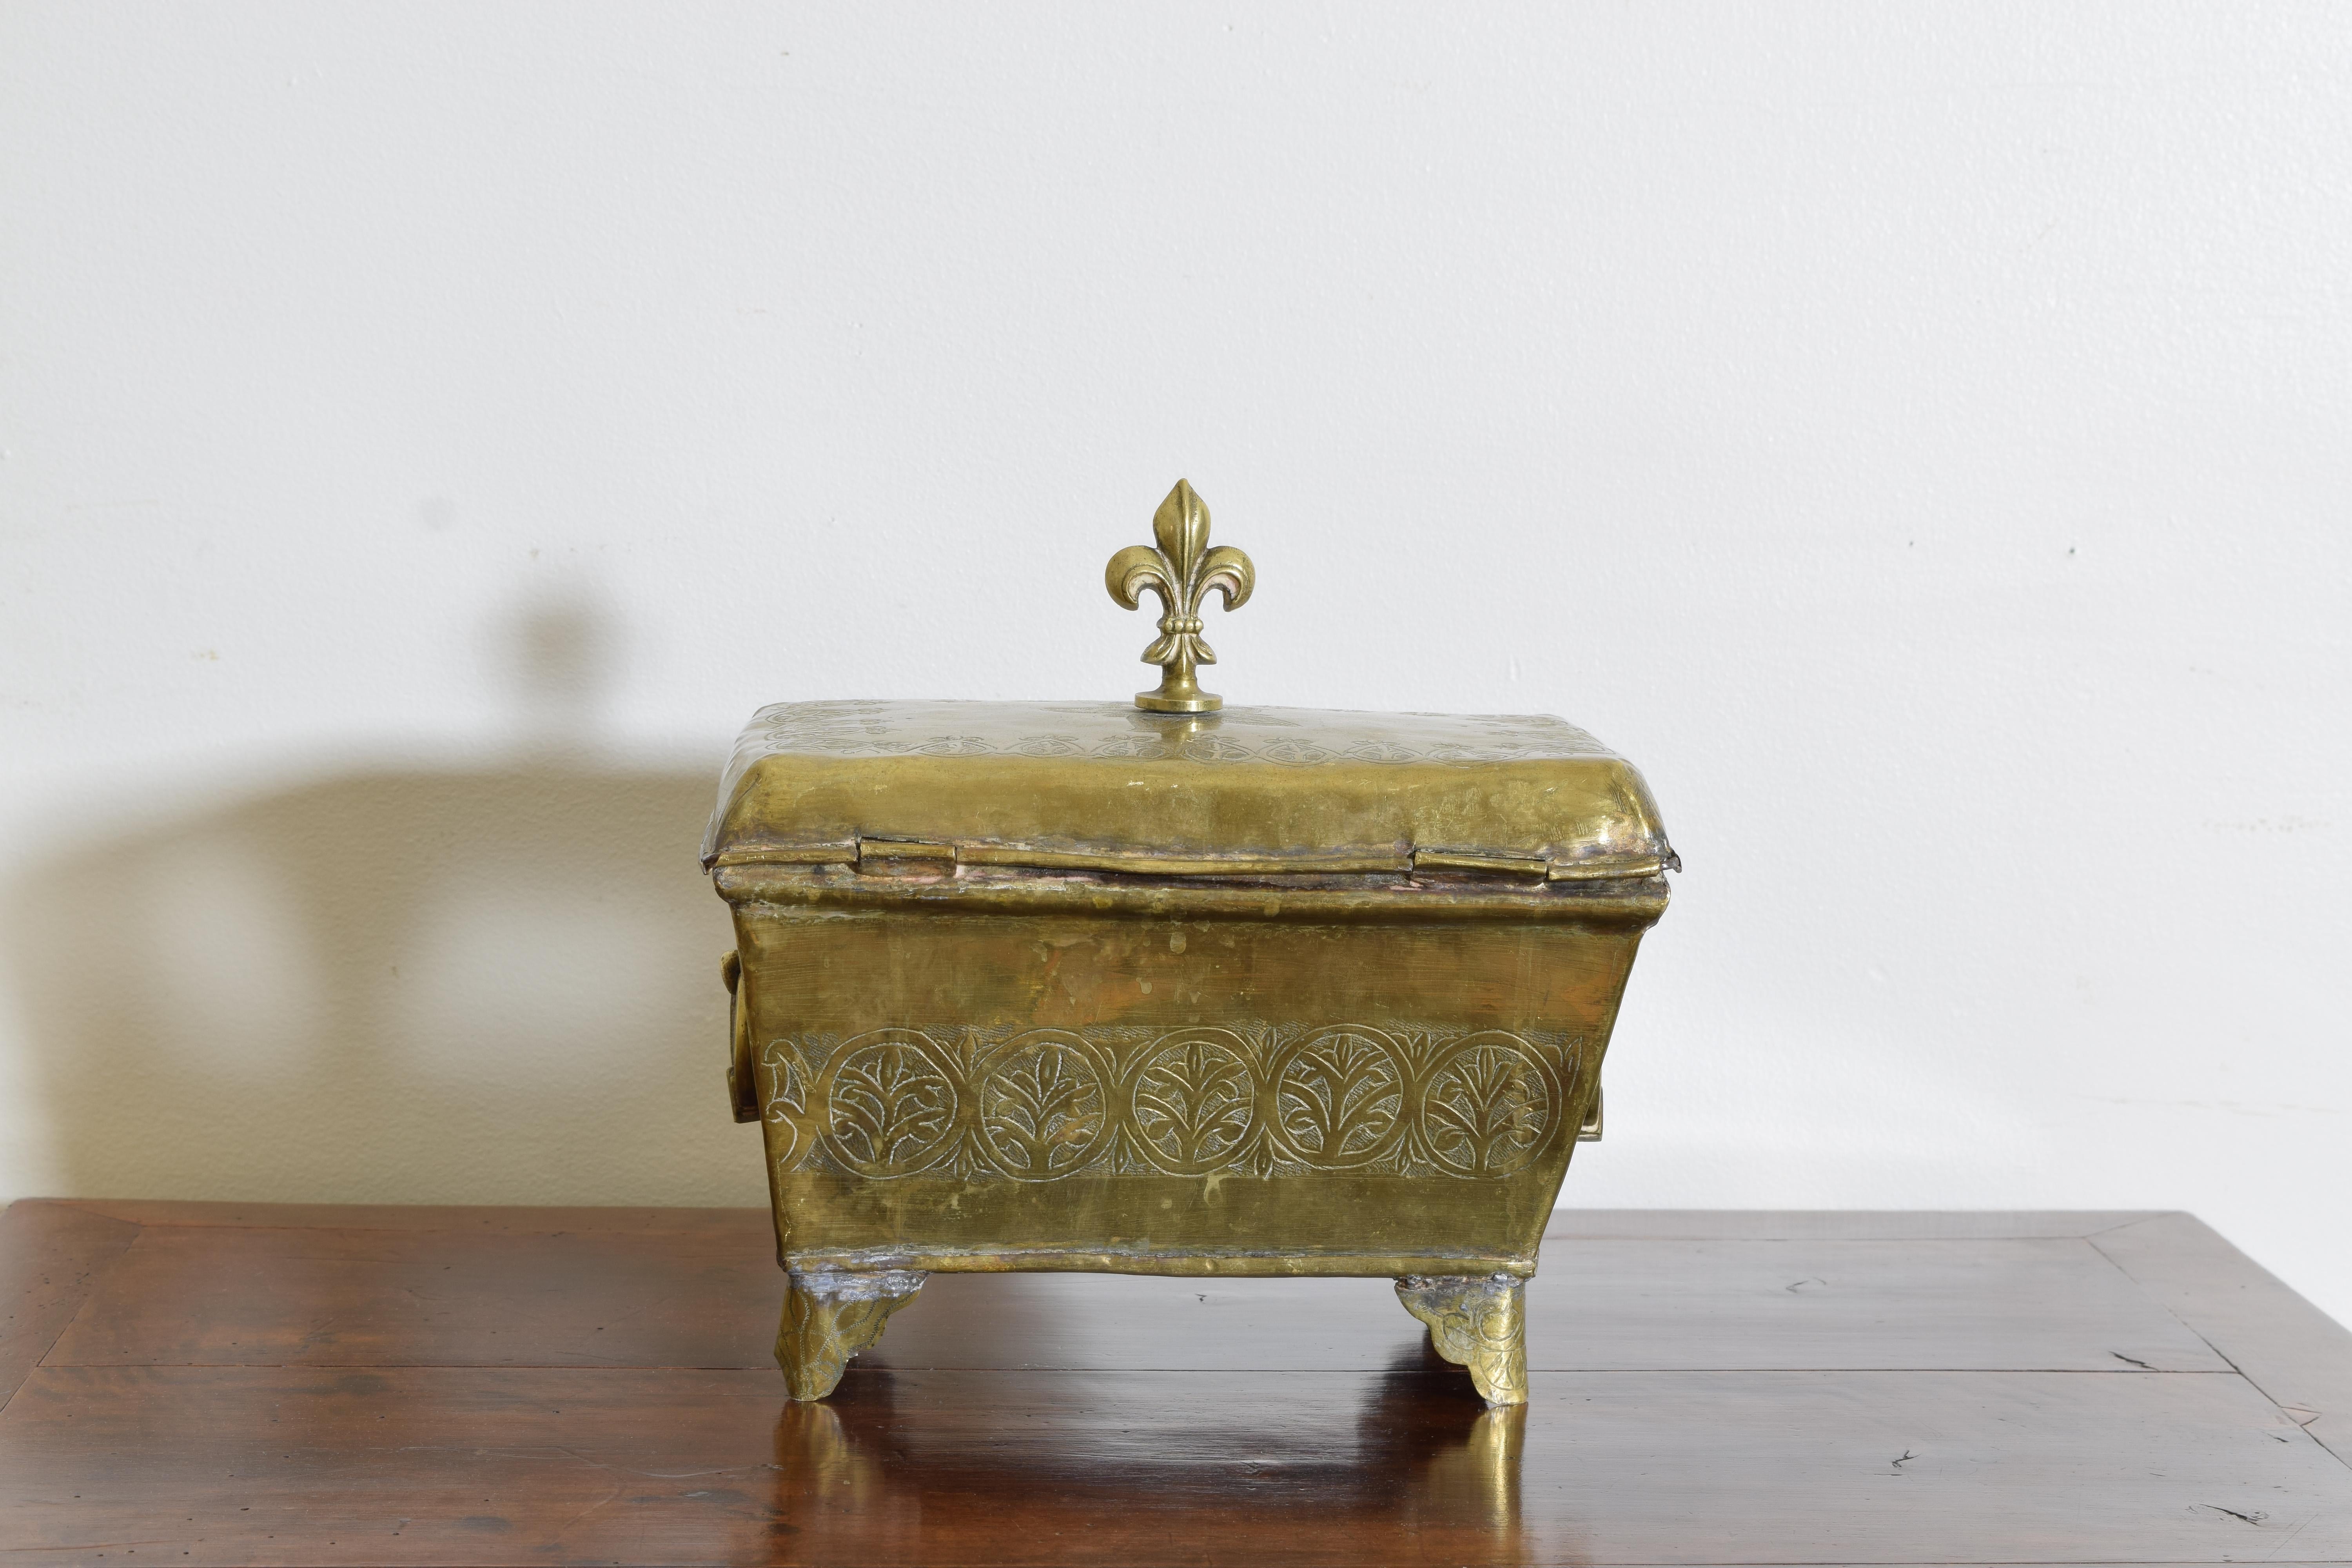 French Louis XIV Period HInged Incised Brass Keeping Box, early 18th century For Sale 4